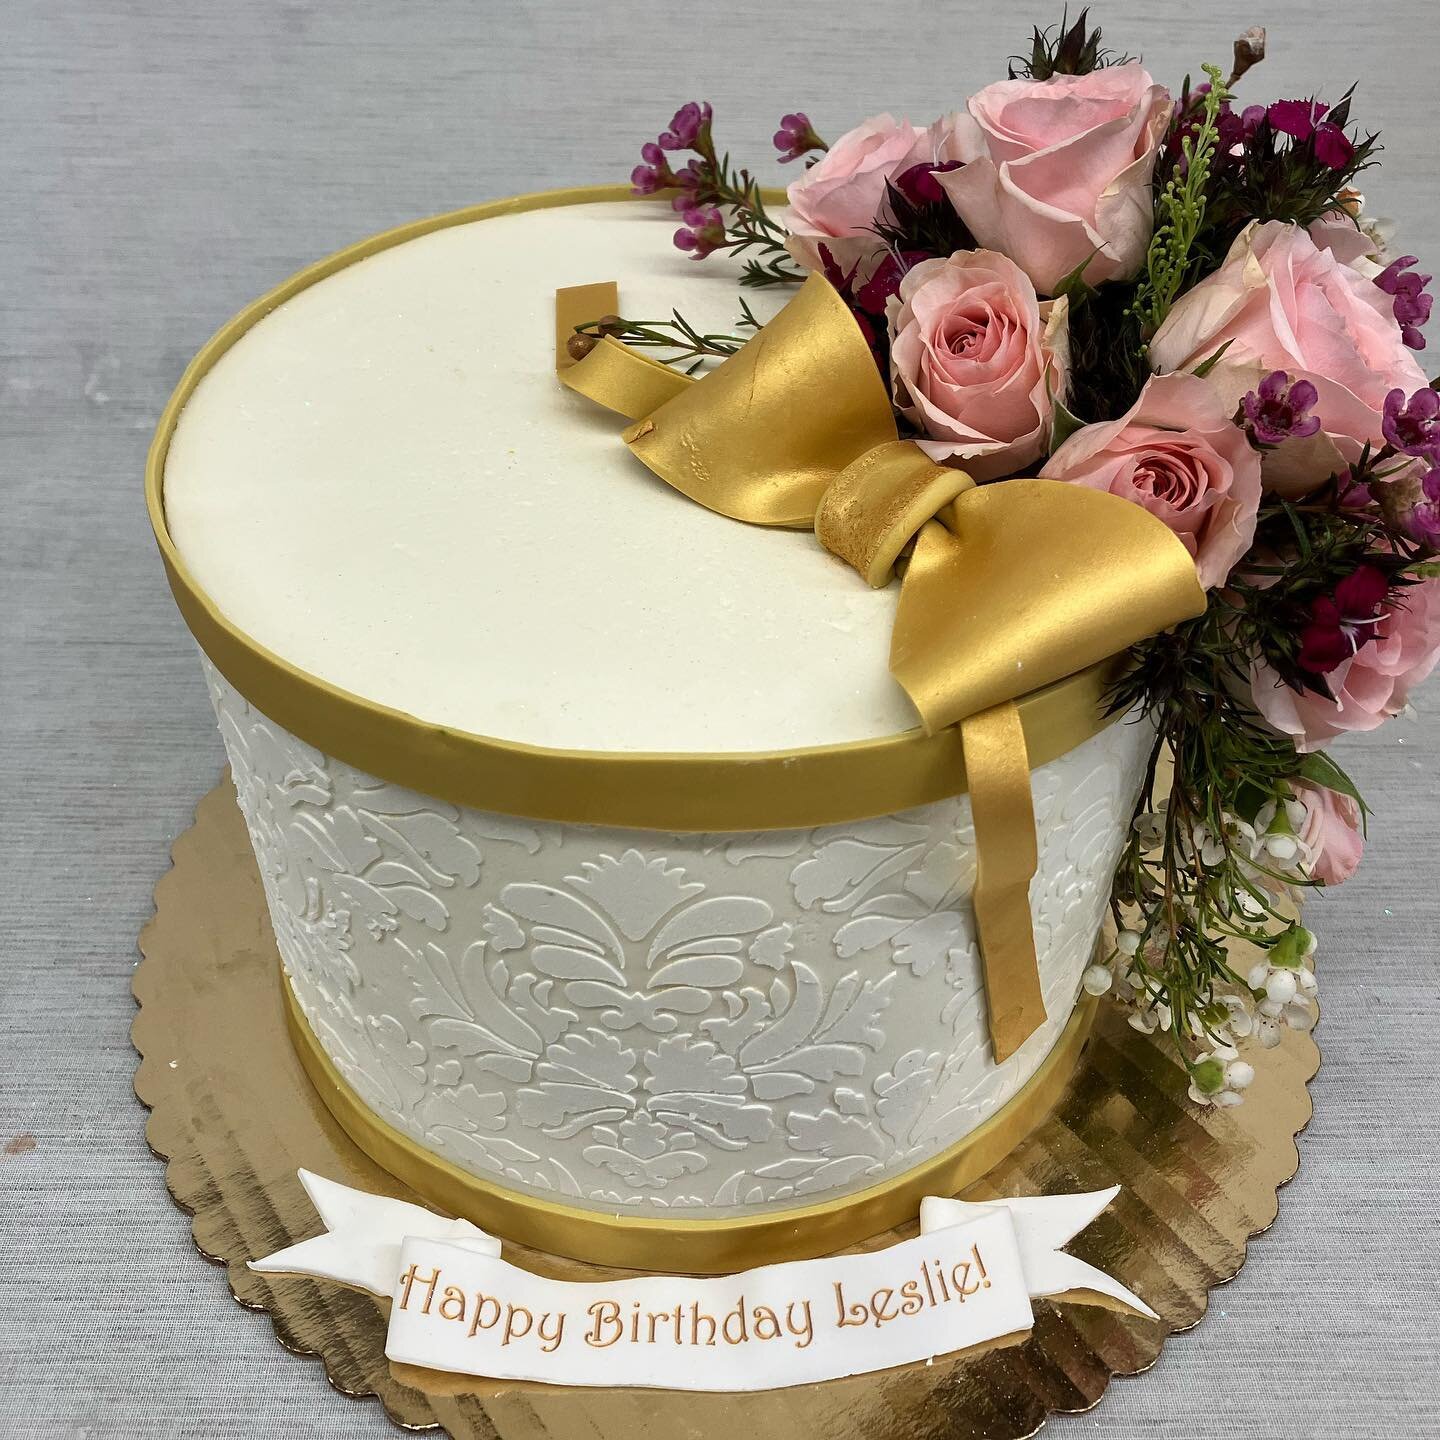 Simple and elegant buttercream cake with fresh flowers 💐 🎂

#sweetandshiny